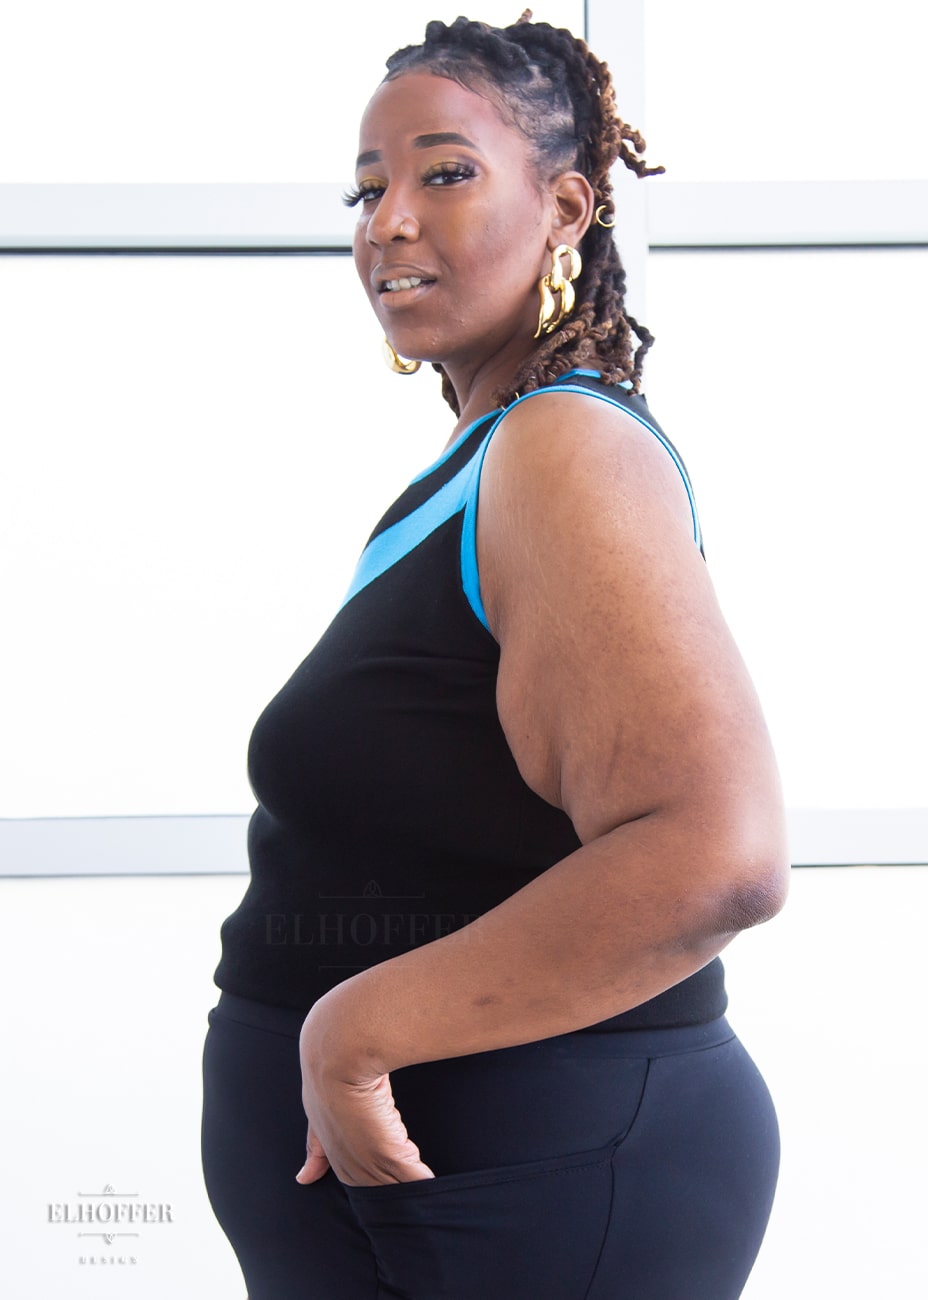 Side view of Myjah, a medium dark skinned 3xl model with shoulder length braids, wearing a light weight sleeveless knit top.  The body of the top is mainly black with a bright teal chevron design across the chest and matching teal binding around the neckline and armholes.